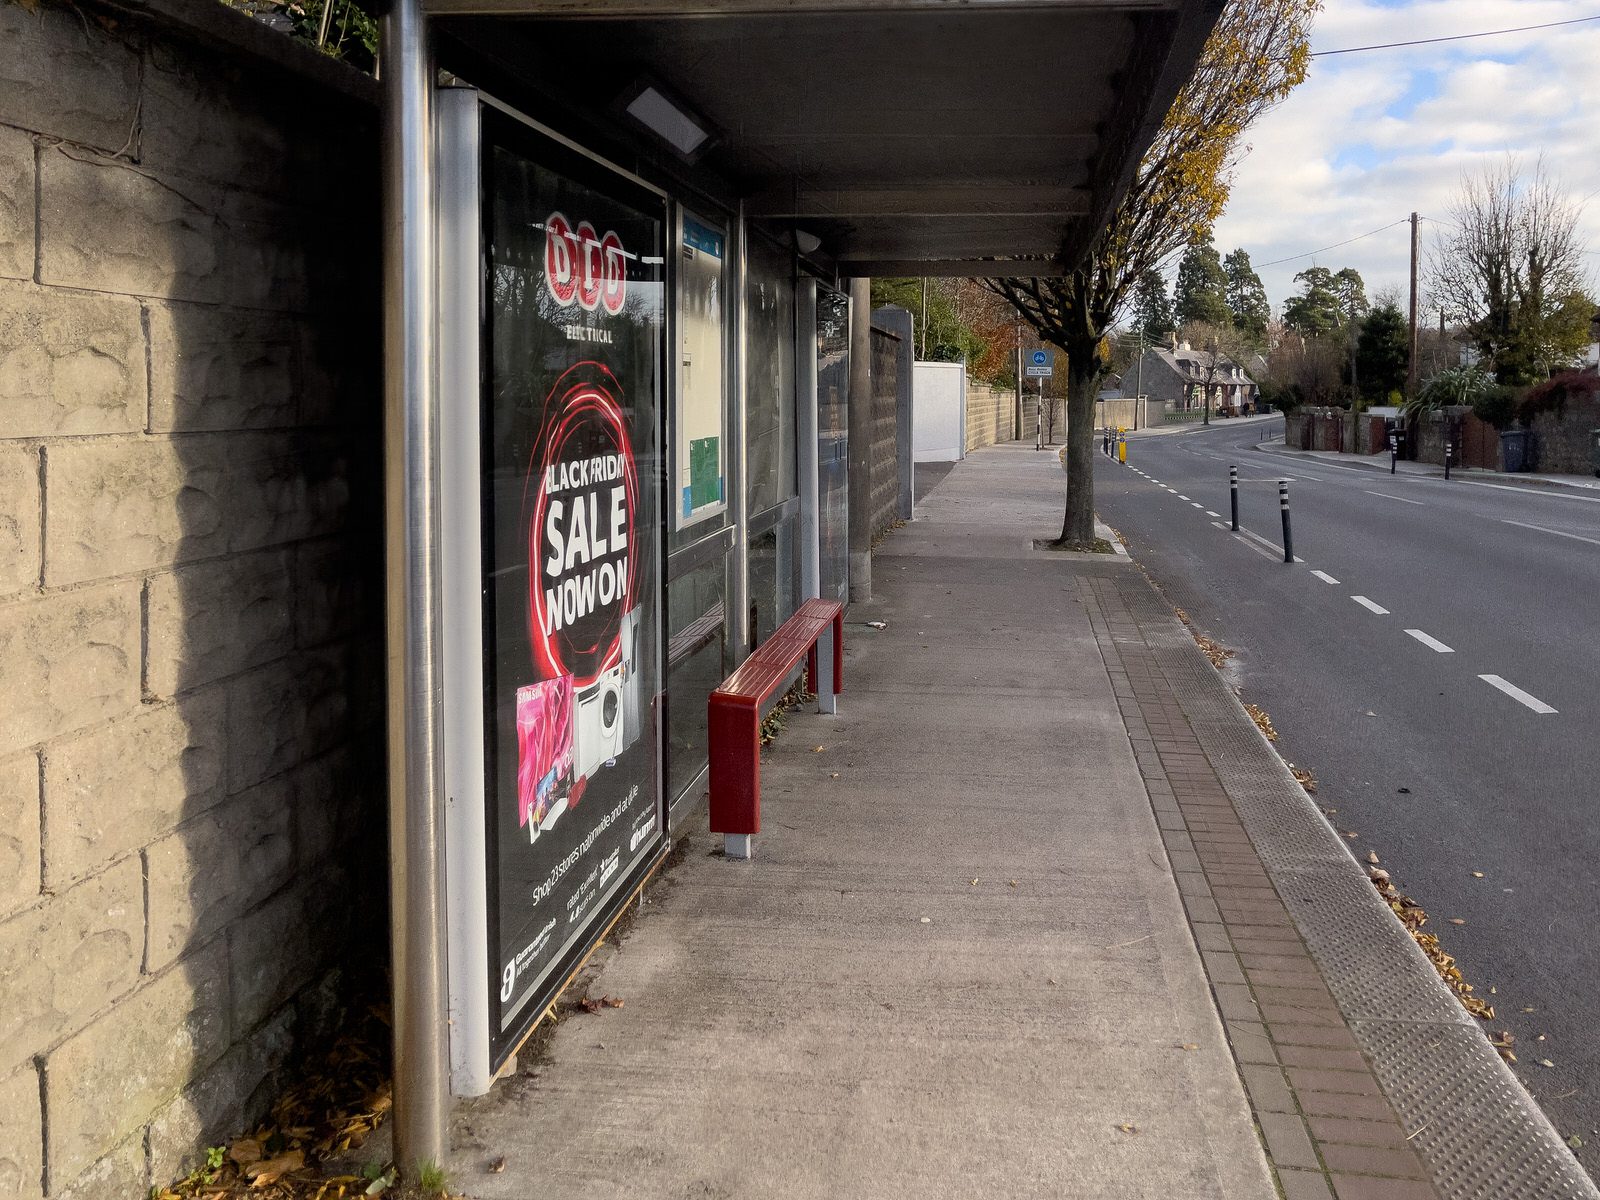 MY FIRST DAY WITHOUT THE 17 BUS SERVICE [WALK FROM S4 BUS STOP IN UCD TO ROEBUCK ROAD]-225589-1